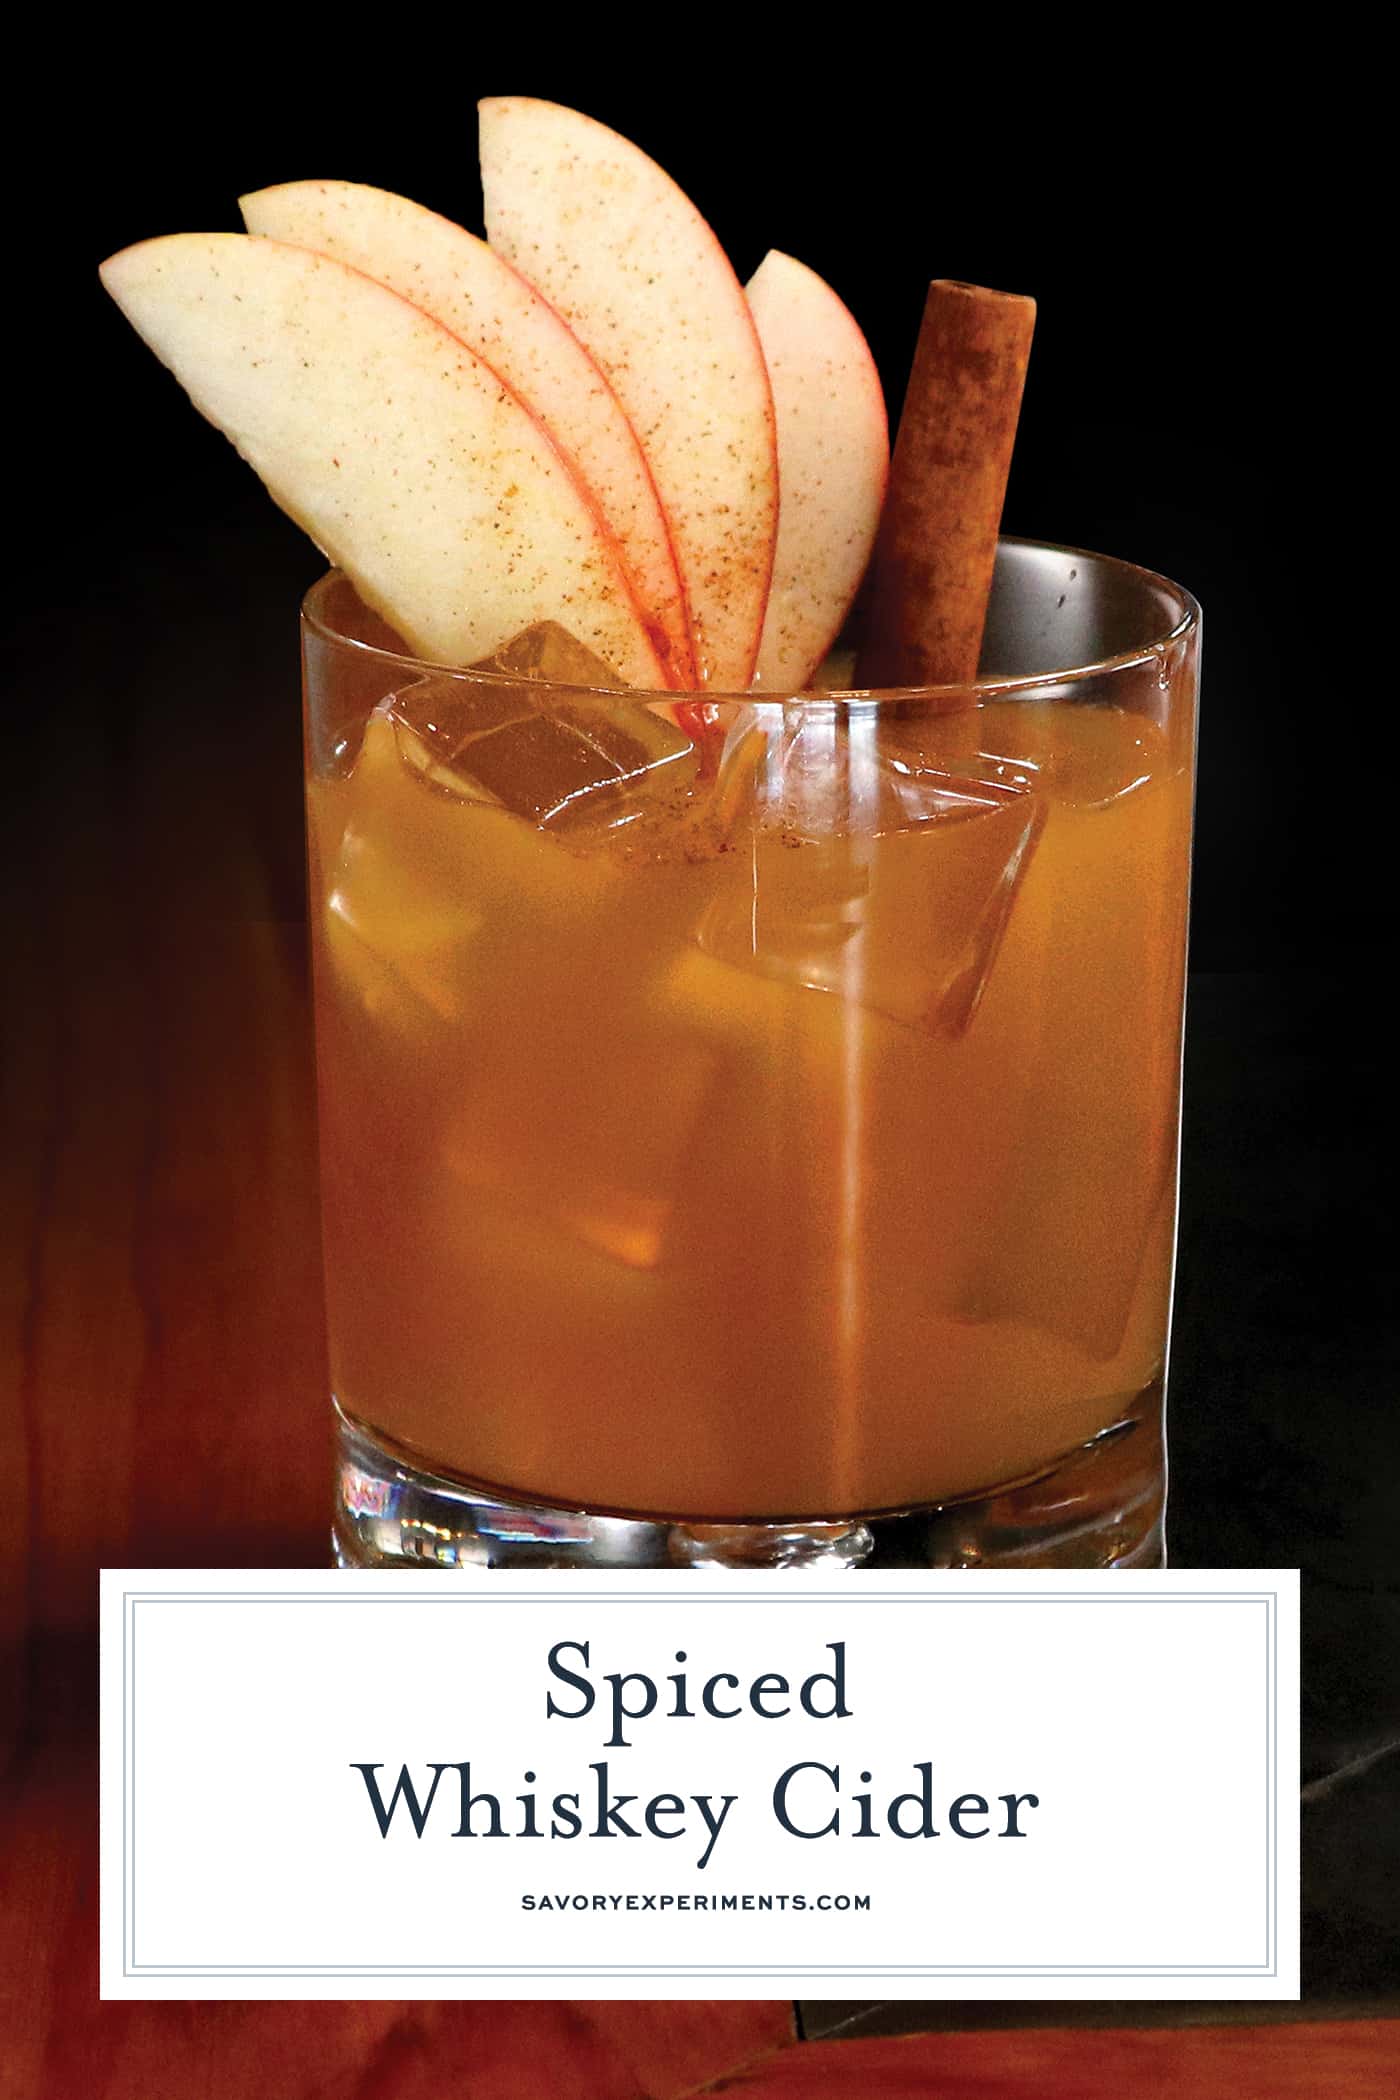 Spiced Whiskey Cider is the perfect fall cocktail using Sagamore Spirit rye whiskey, apple cider, lime juice and simple syrup. #whiskeycocktails www.savoryexperiments.com 